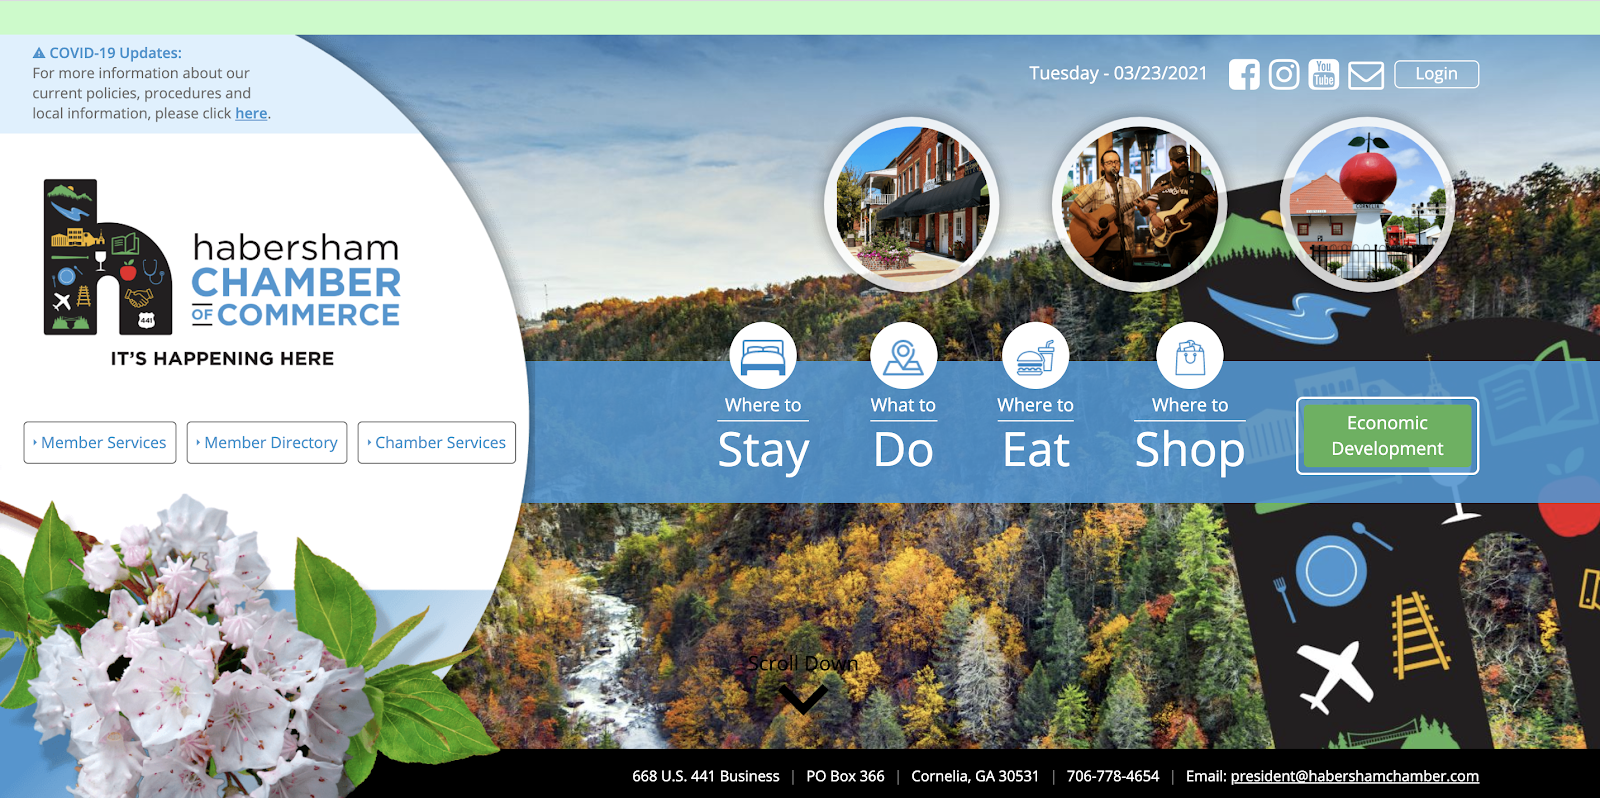 Habersham Chamber of Commerce homepage showing clearly labelled icons using keywords to aid navigation.